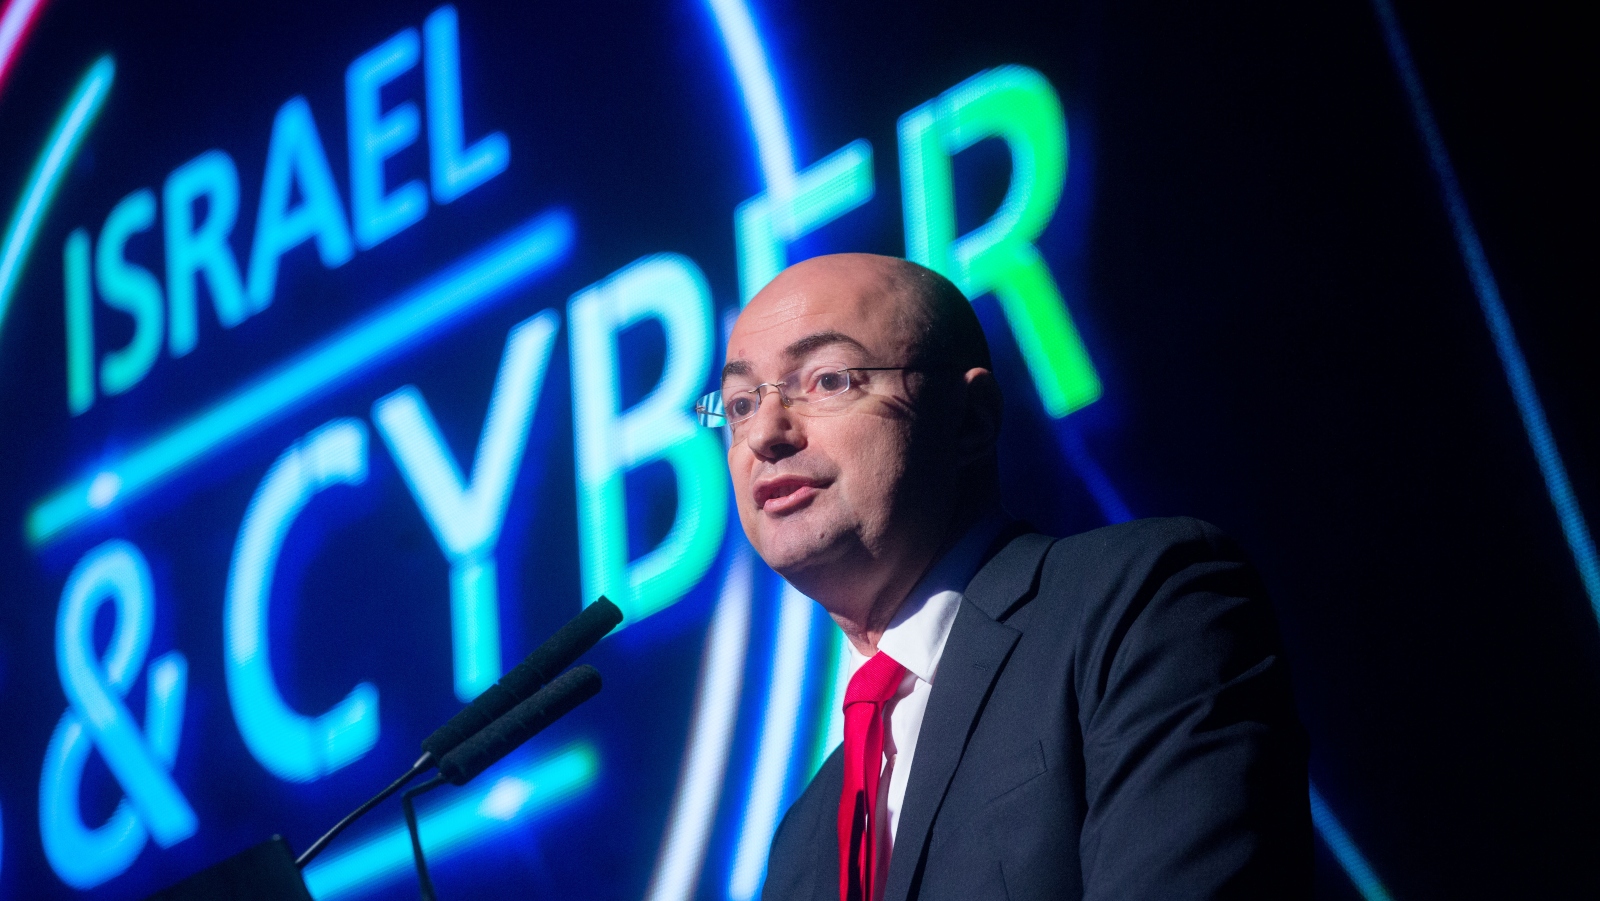 Yigal Unna, CEO of the Israel National Cyber Security Authority, speaking at a Homeland Security and Cyber Conference in Tel Aviv. Photo by Miriam Alster/FLASH90